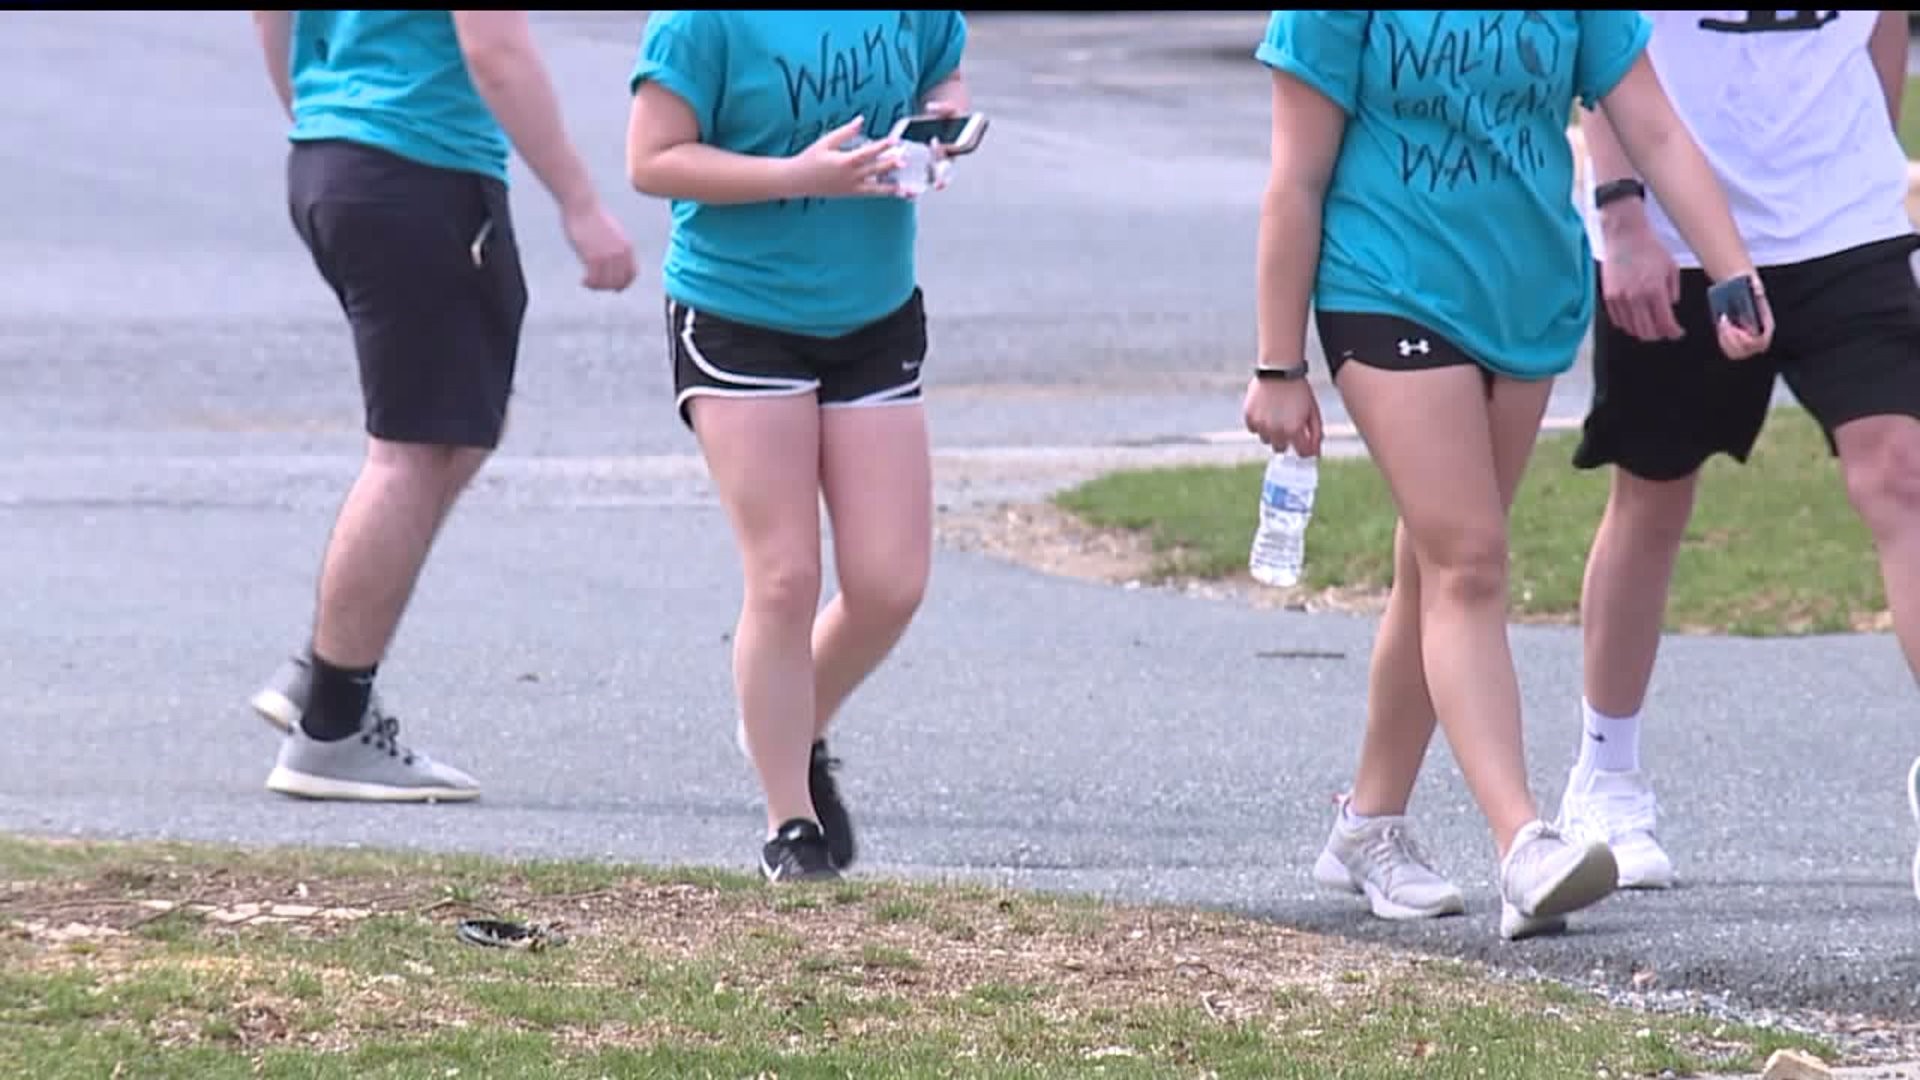 Hershey High School students walk to help get clean water to those in need